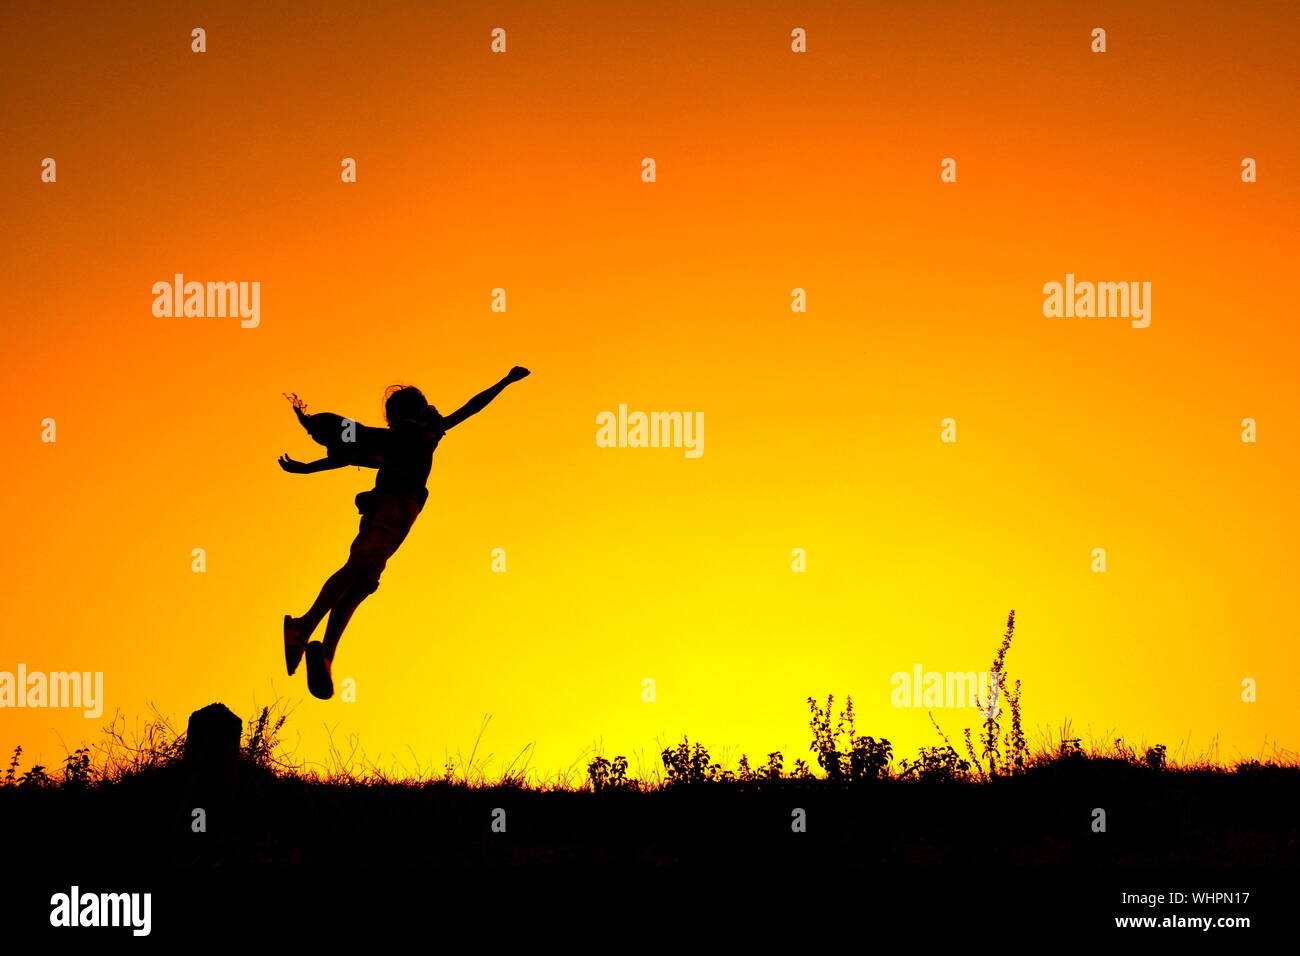 Silhouette Person Jumping In Mid-air Against Orange Sky Stock Photo